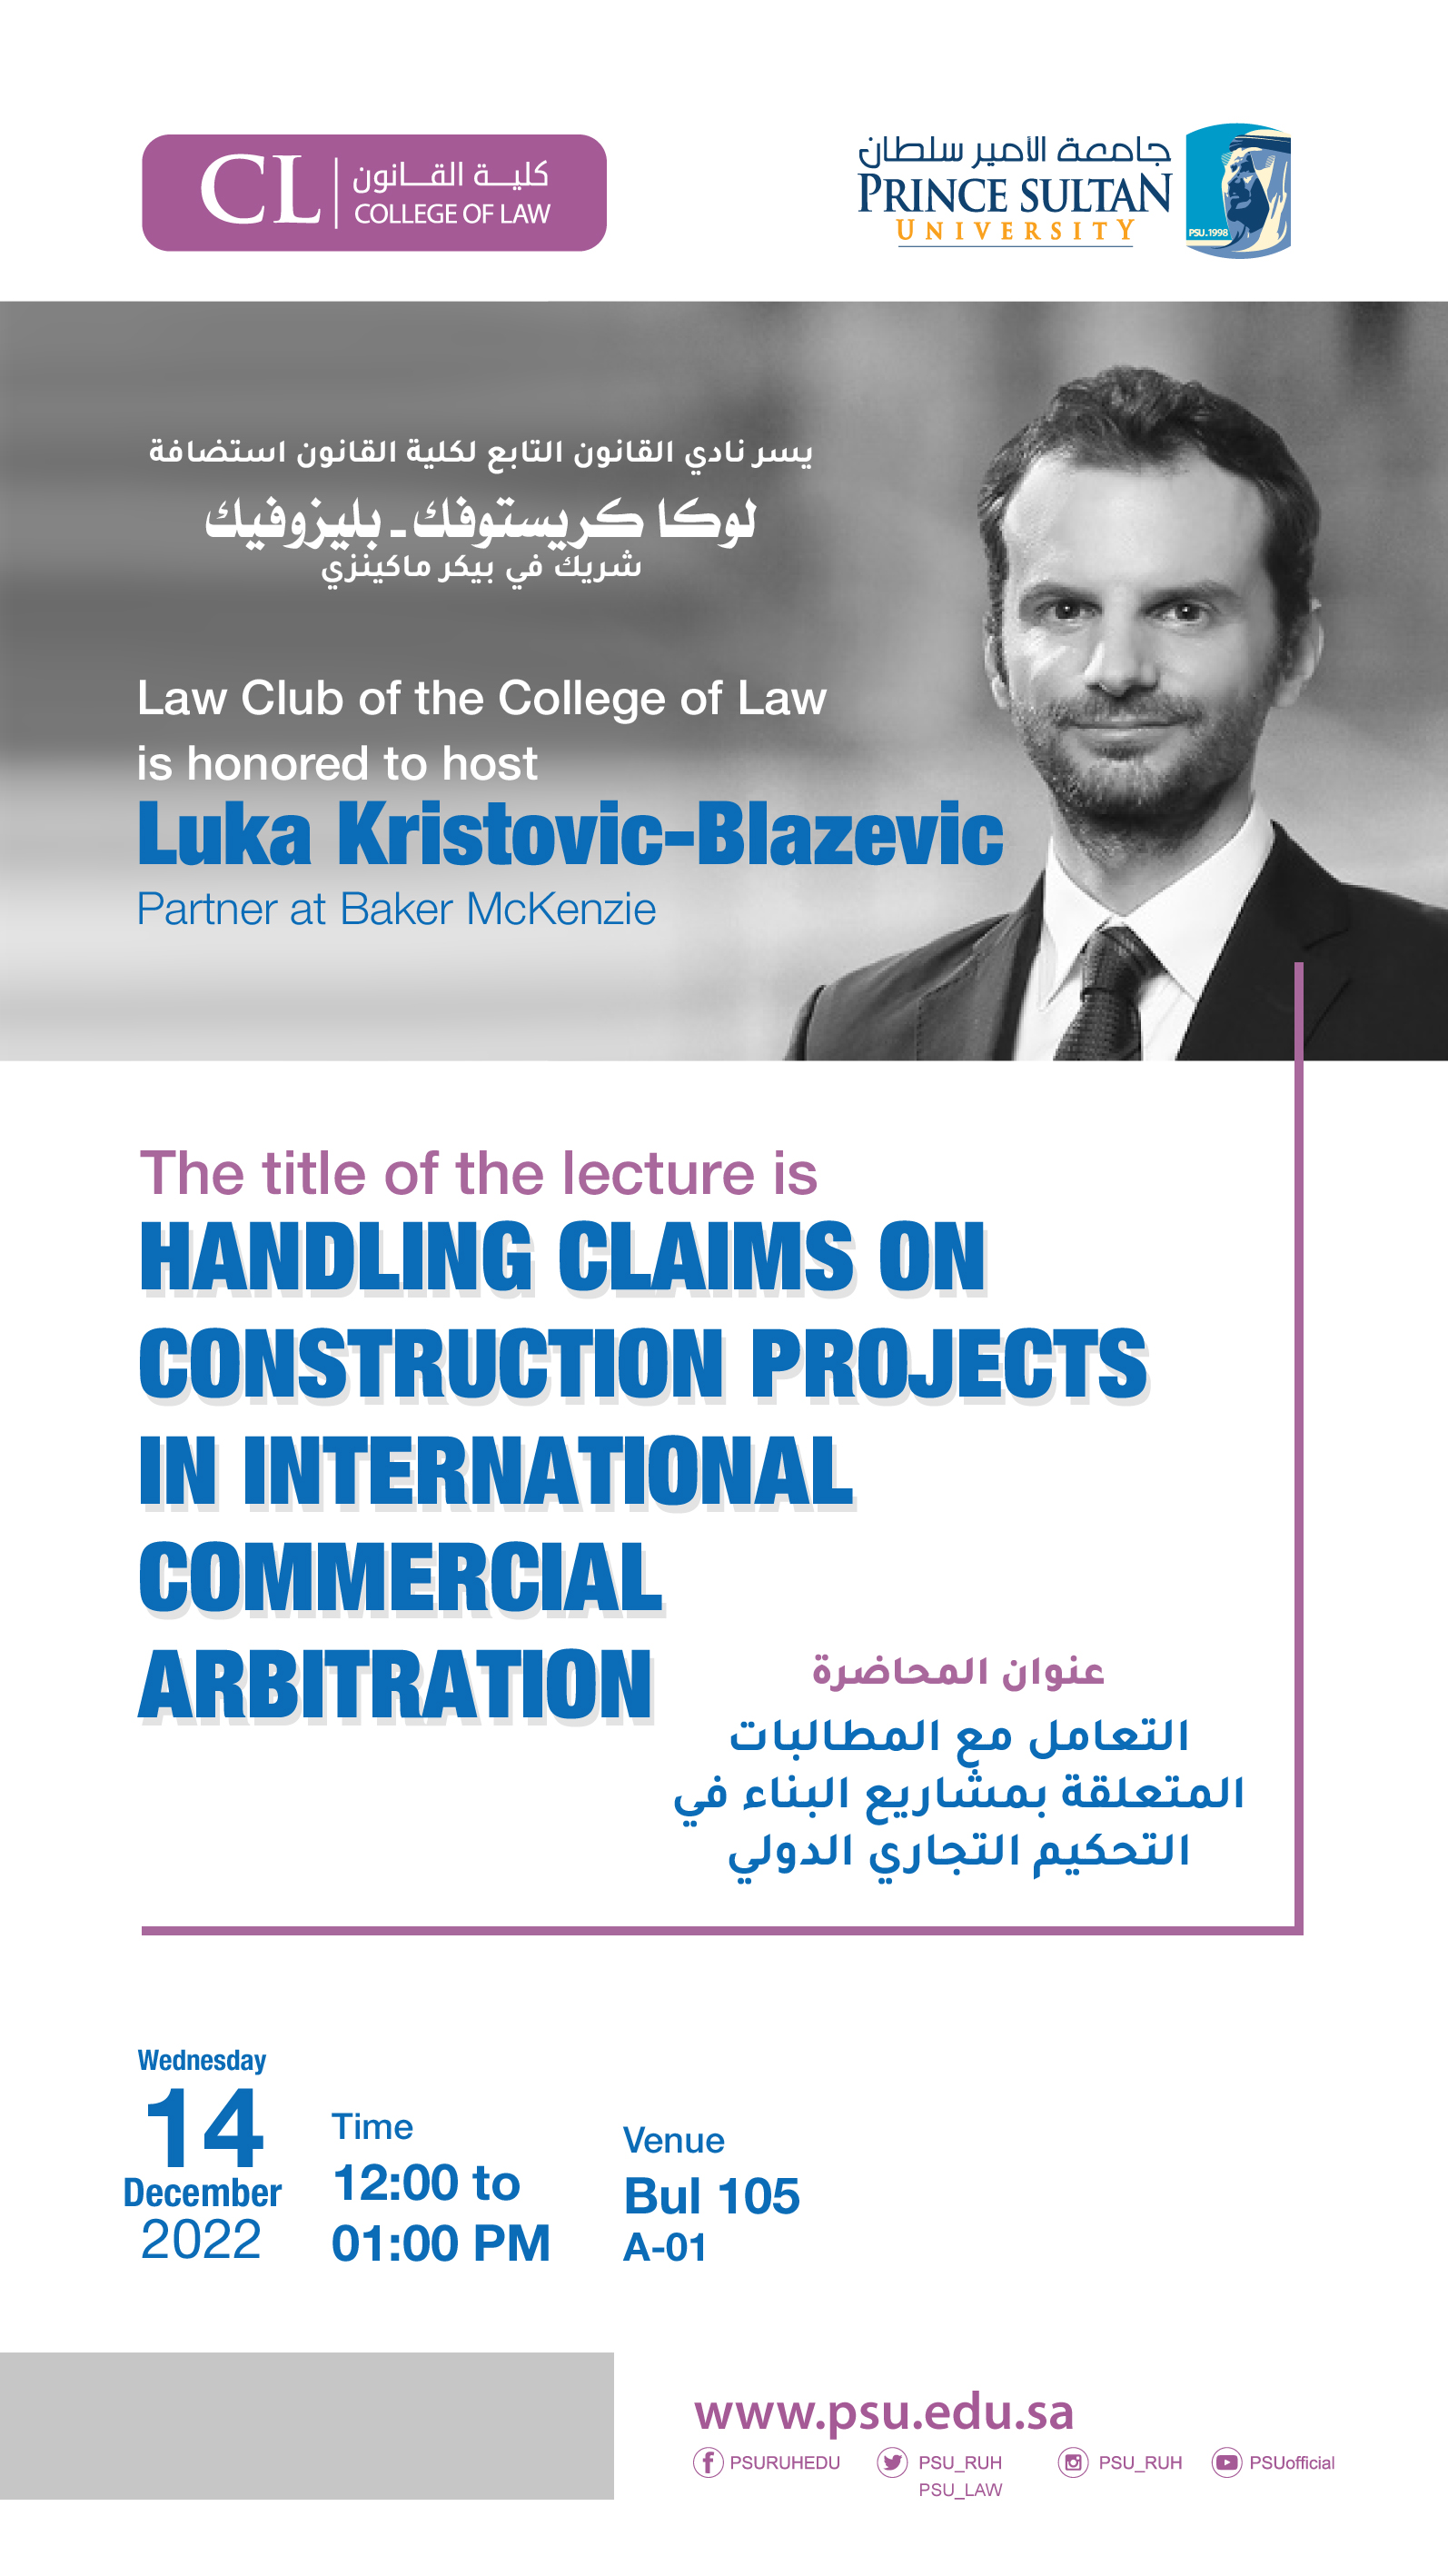 A lecture on HANDLING CLAIMS ON CONSTRUCTION PROJECTS IN INTERNATIONAL COMMERCIAL ARBITRATION